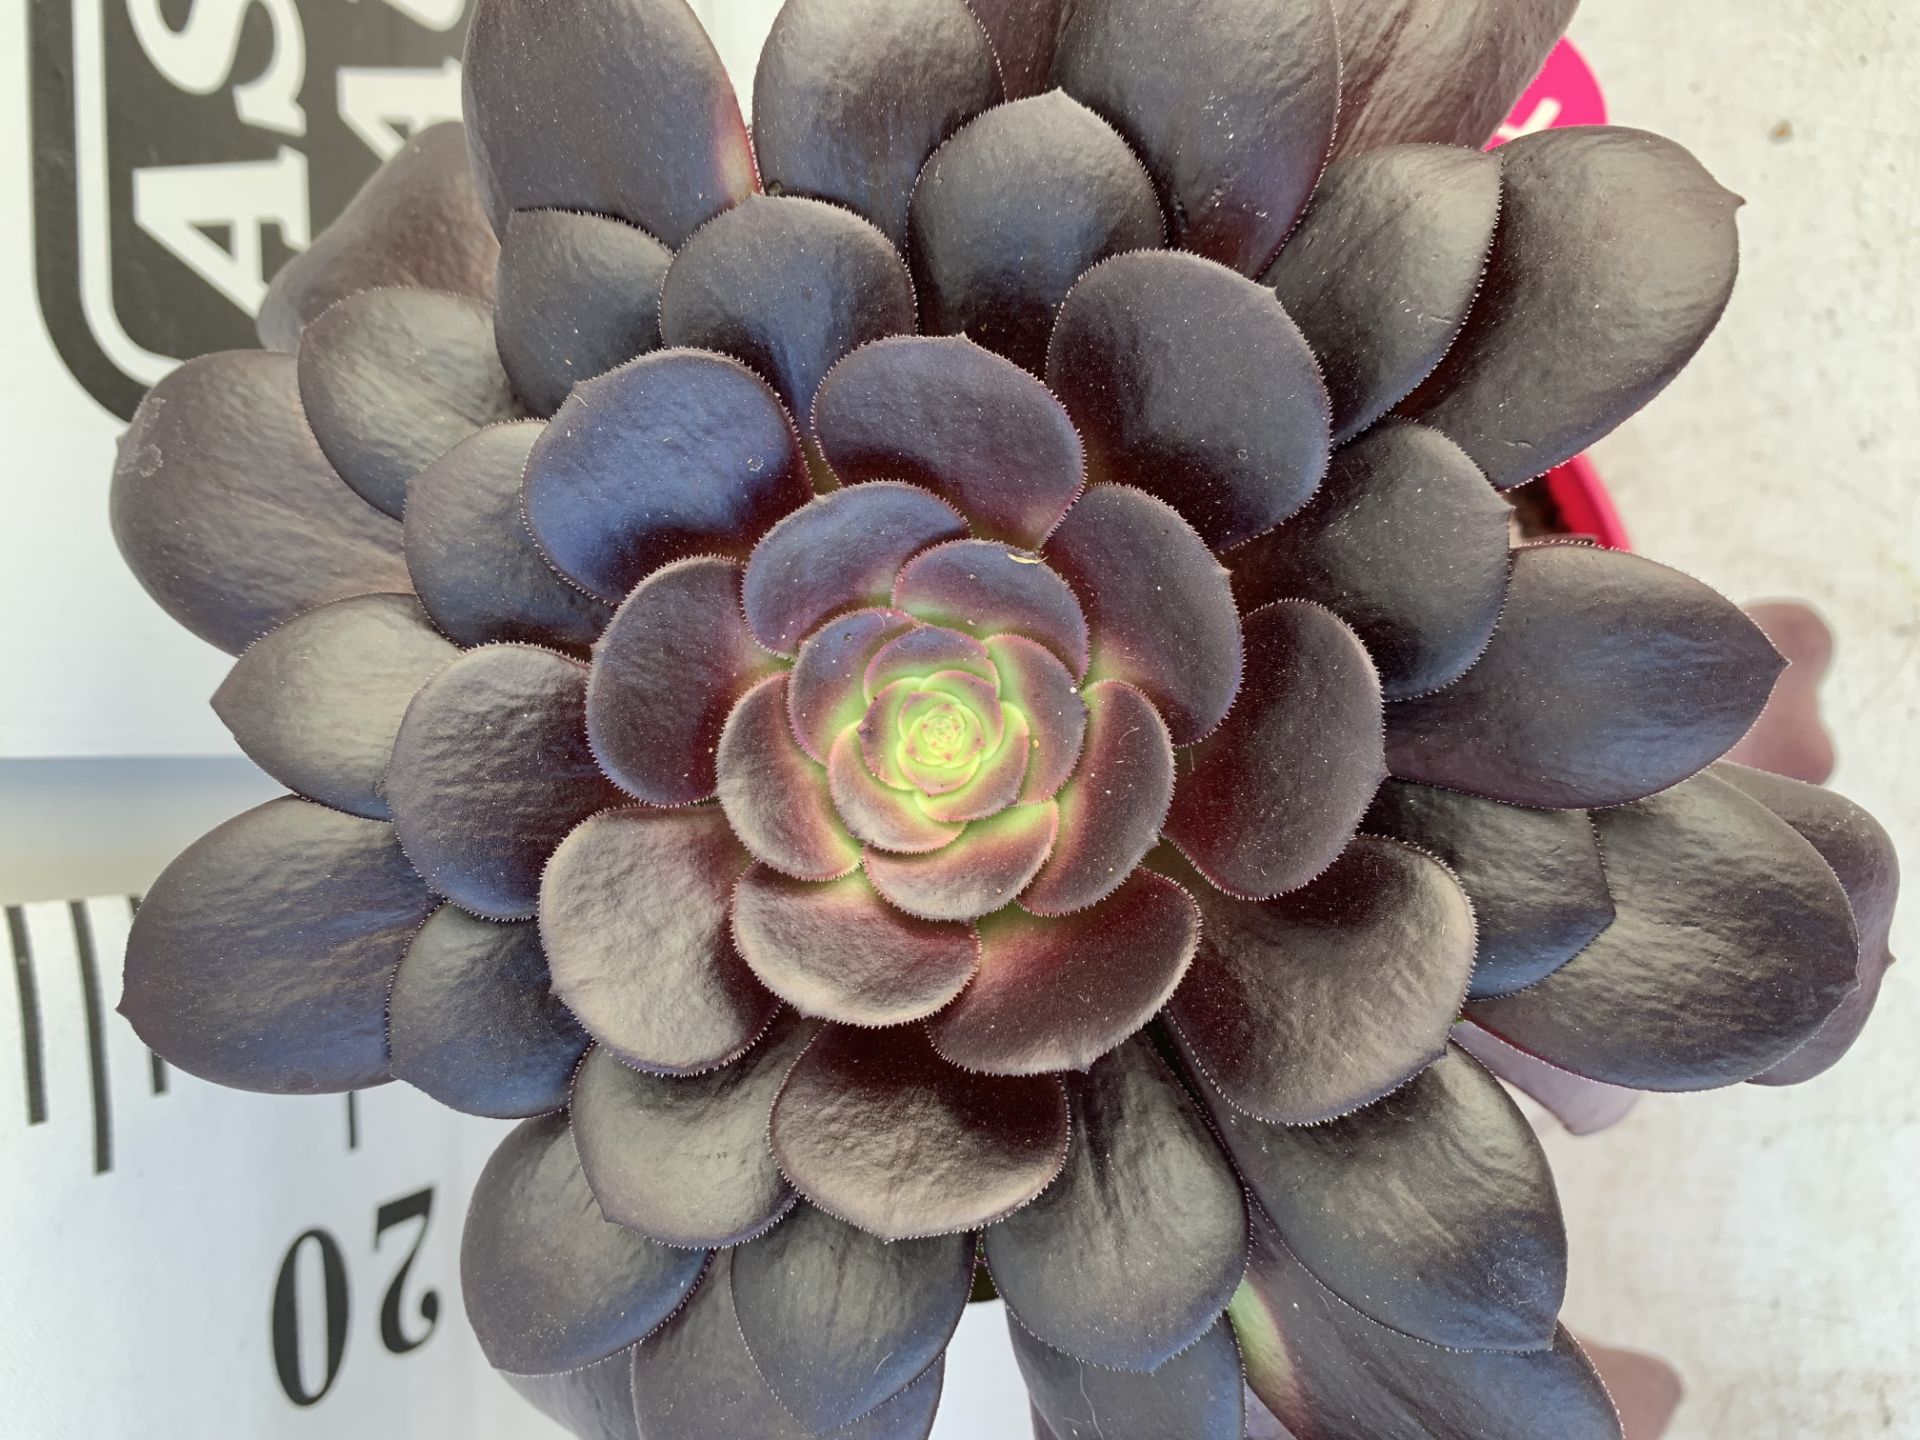 TWO AEONIUM ARBOREUM VELOURS IN 1 LTR POTS 25CM TALL PLUS VAT TO BE SOLD FOR THE TWO - Image 5 of 6